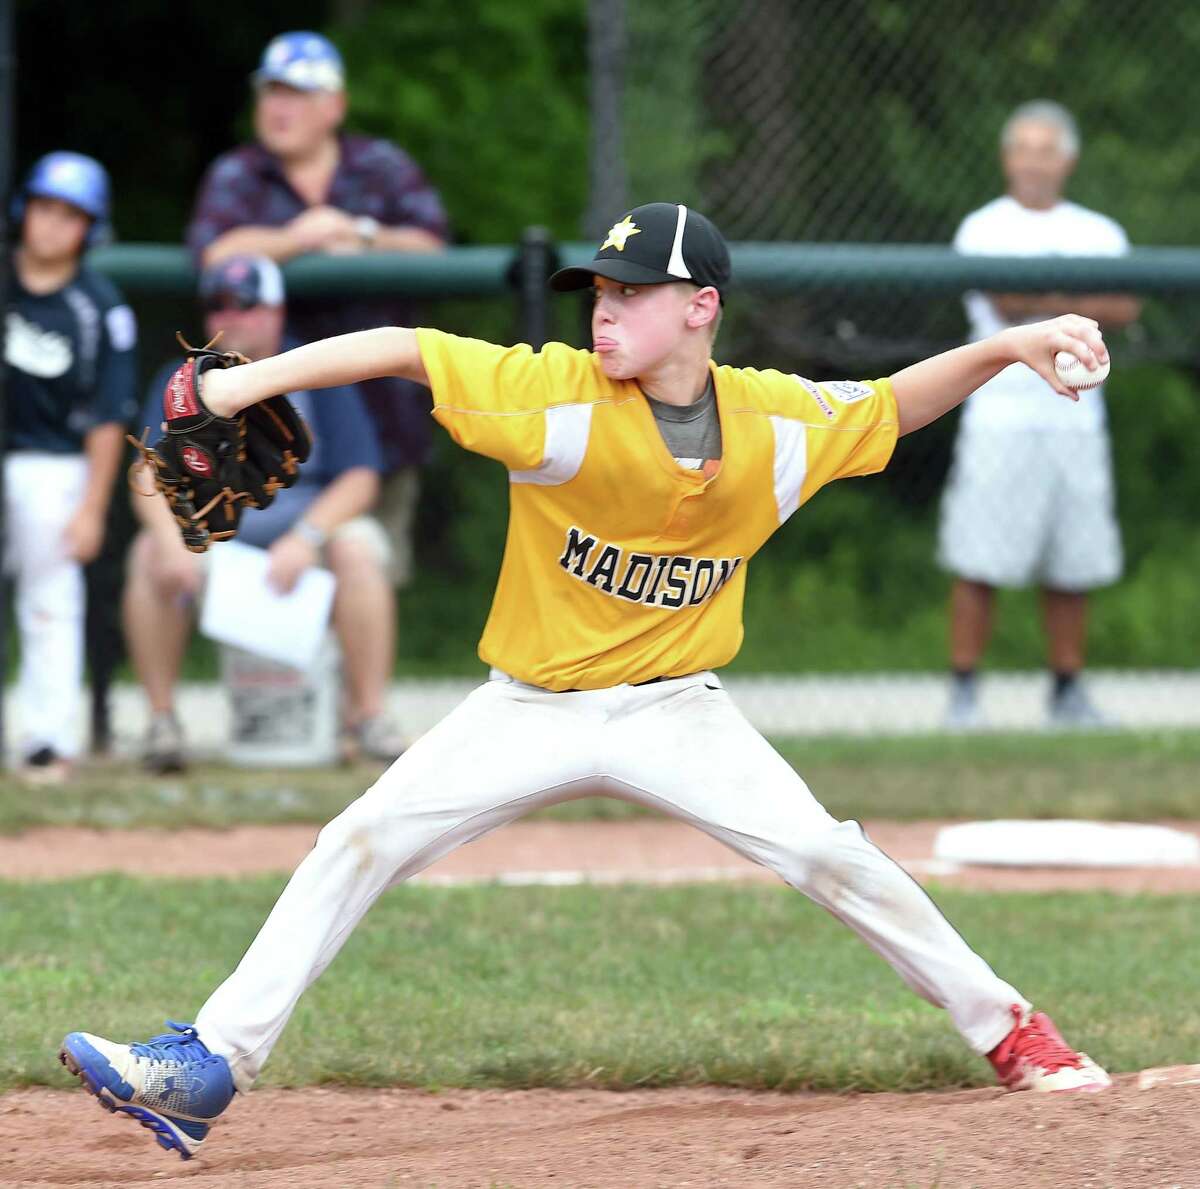 Christian Kells of Madison pitches against Wethersfield in their Section 3 Little League tournament game in Killingworth on Sunday. Madison won 2-1.